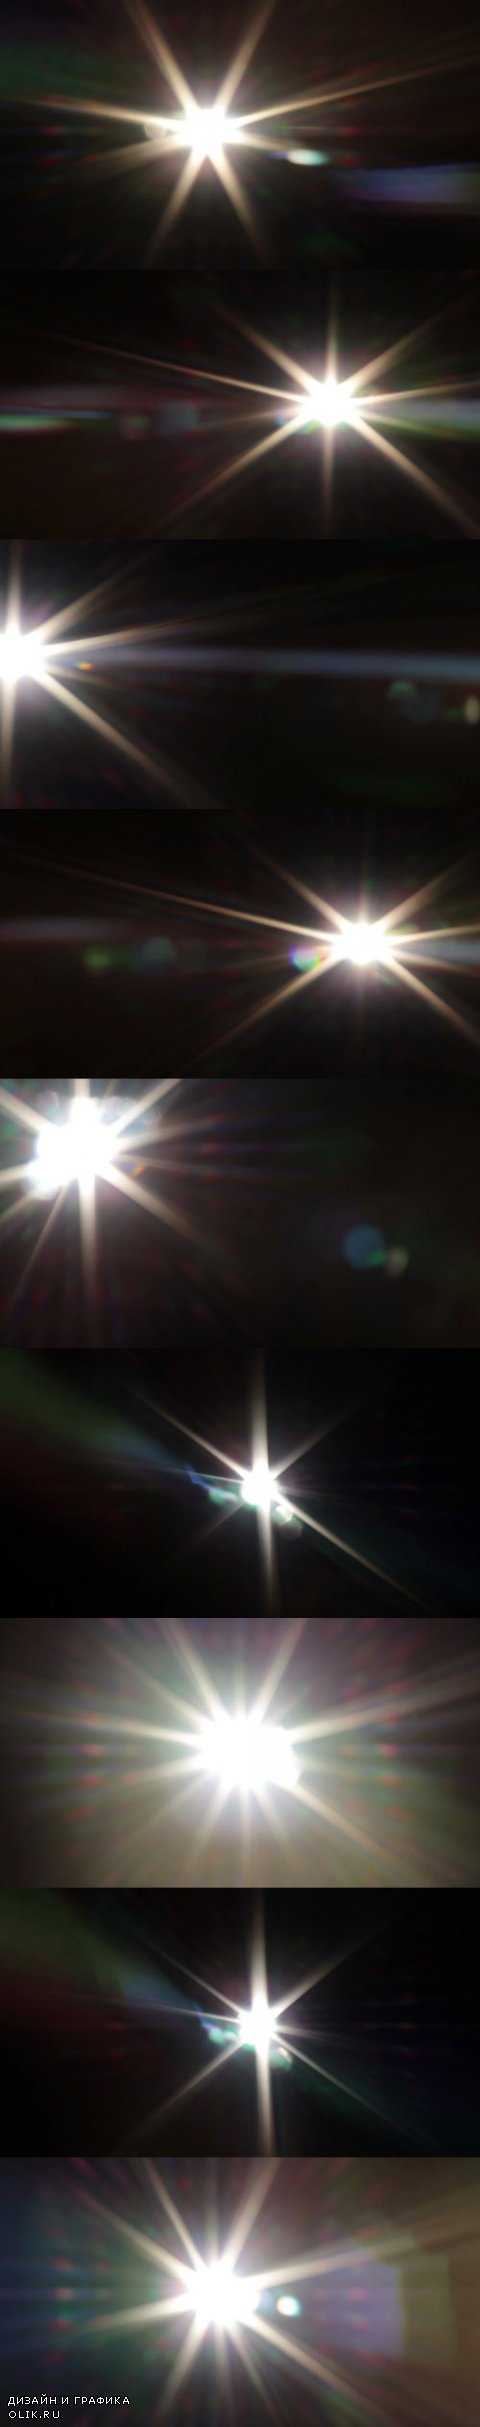 Lens Flares And Lights